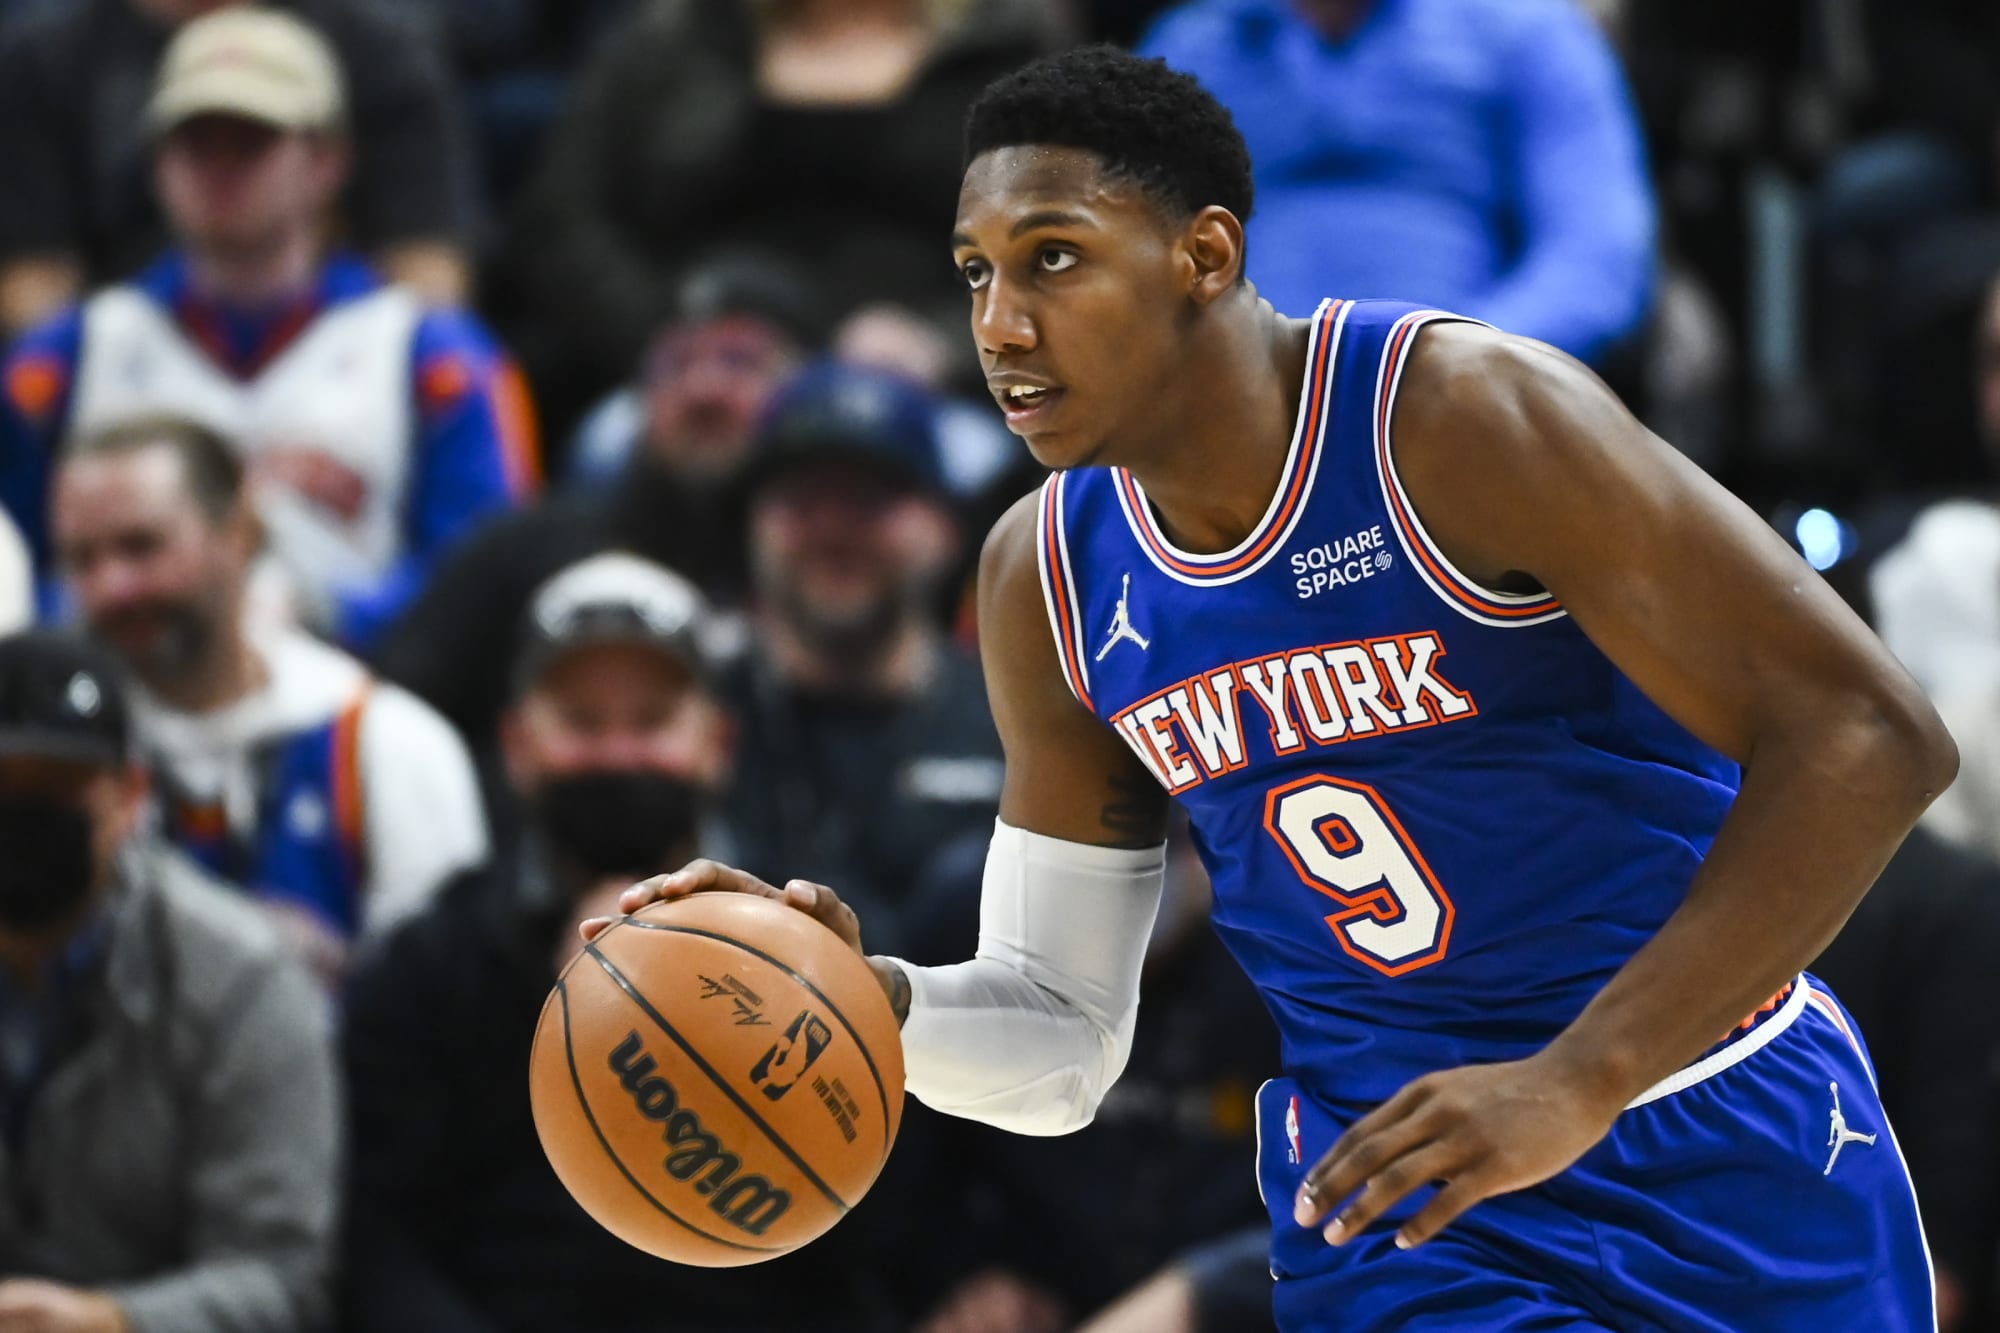 RJ Barrett scores 12 in a scrimmage, Fournier sprains an ankle - Posting  and Toasting